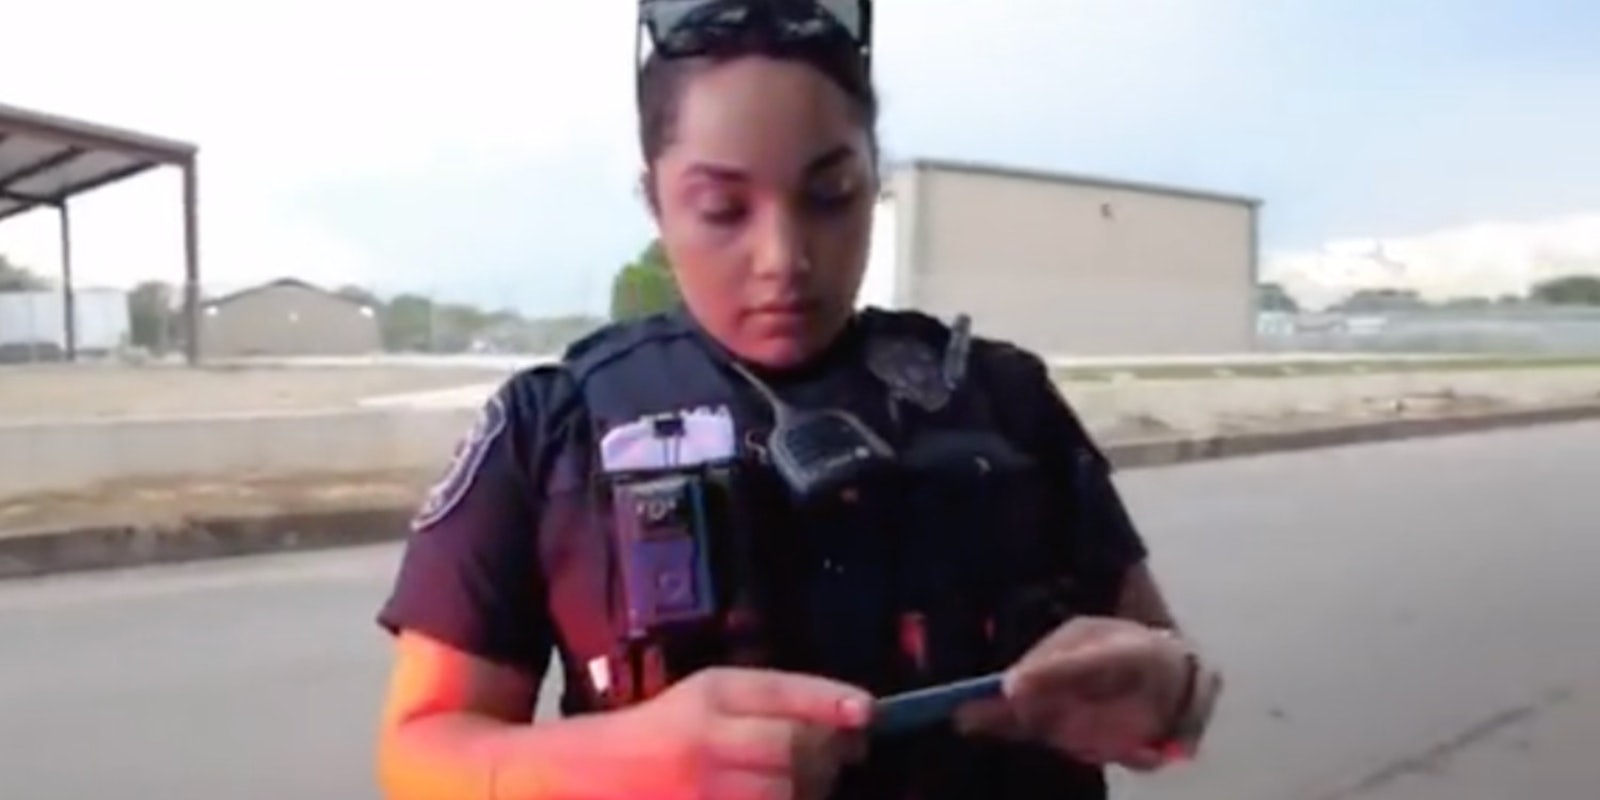 Texas officer questions driver for driving without Texas driver's license